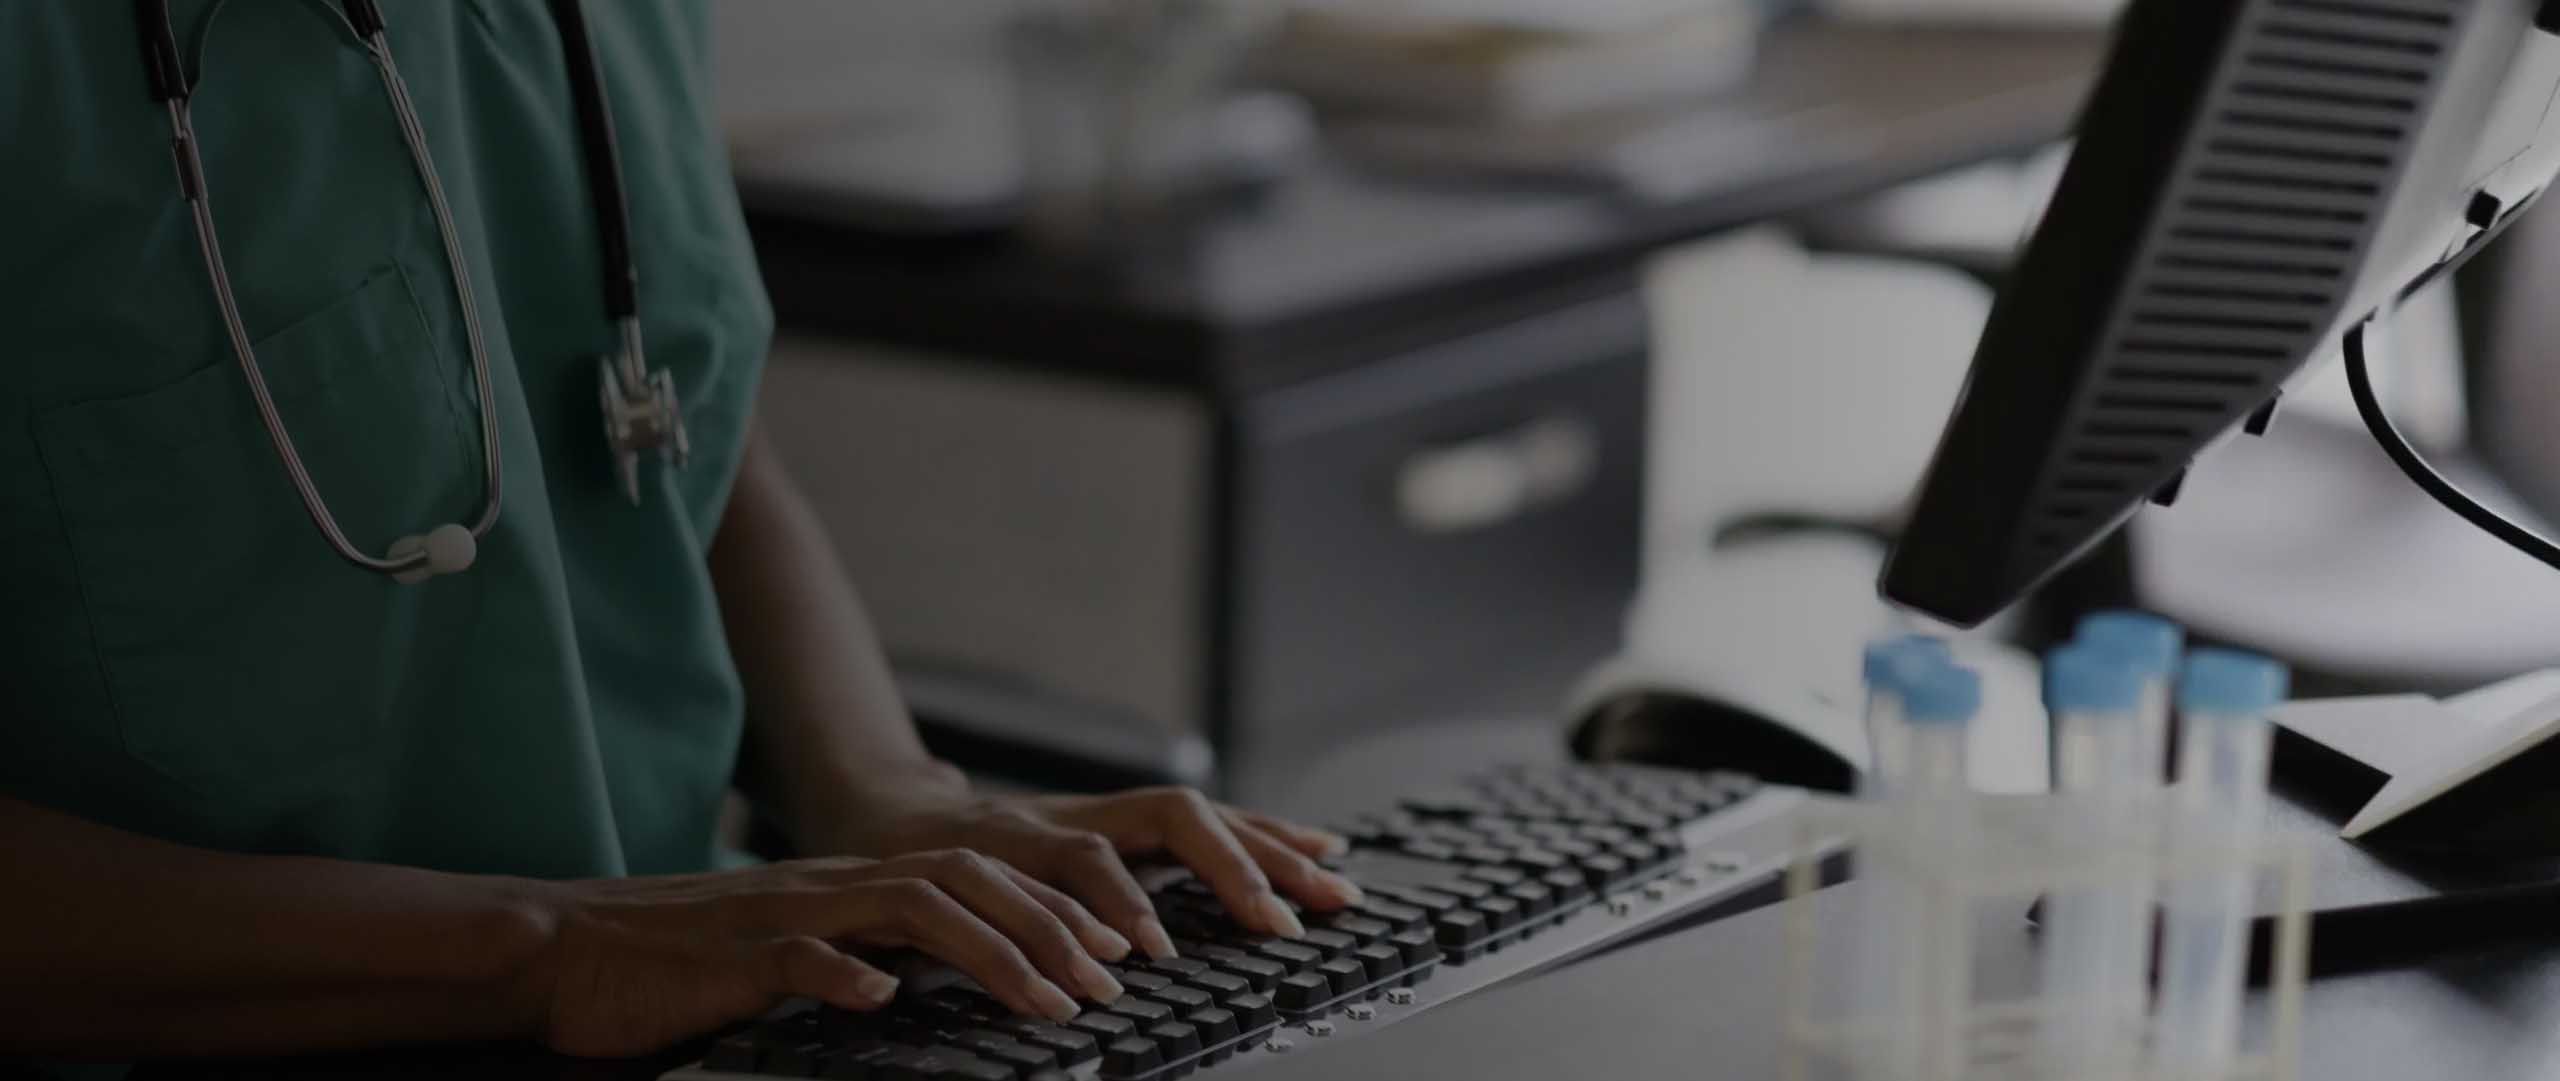 Background image of a healthcare worker at a computer.